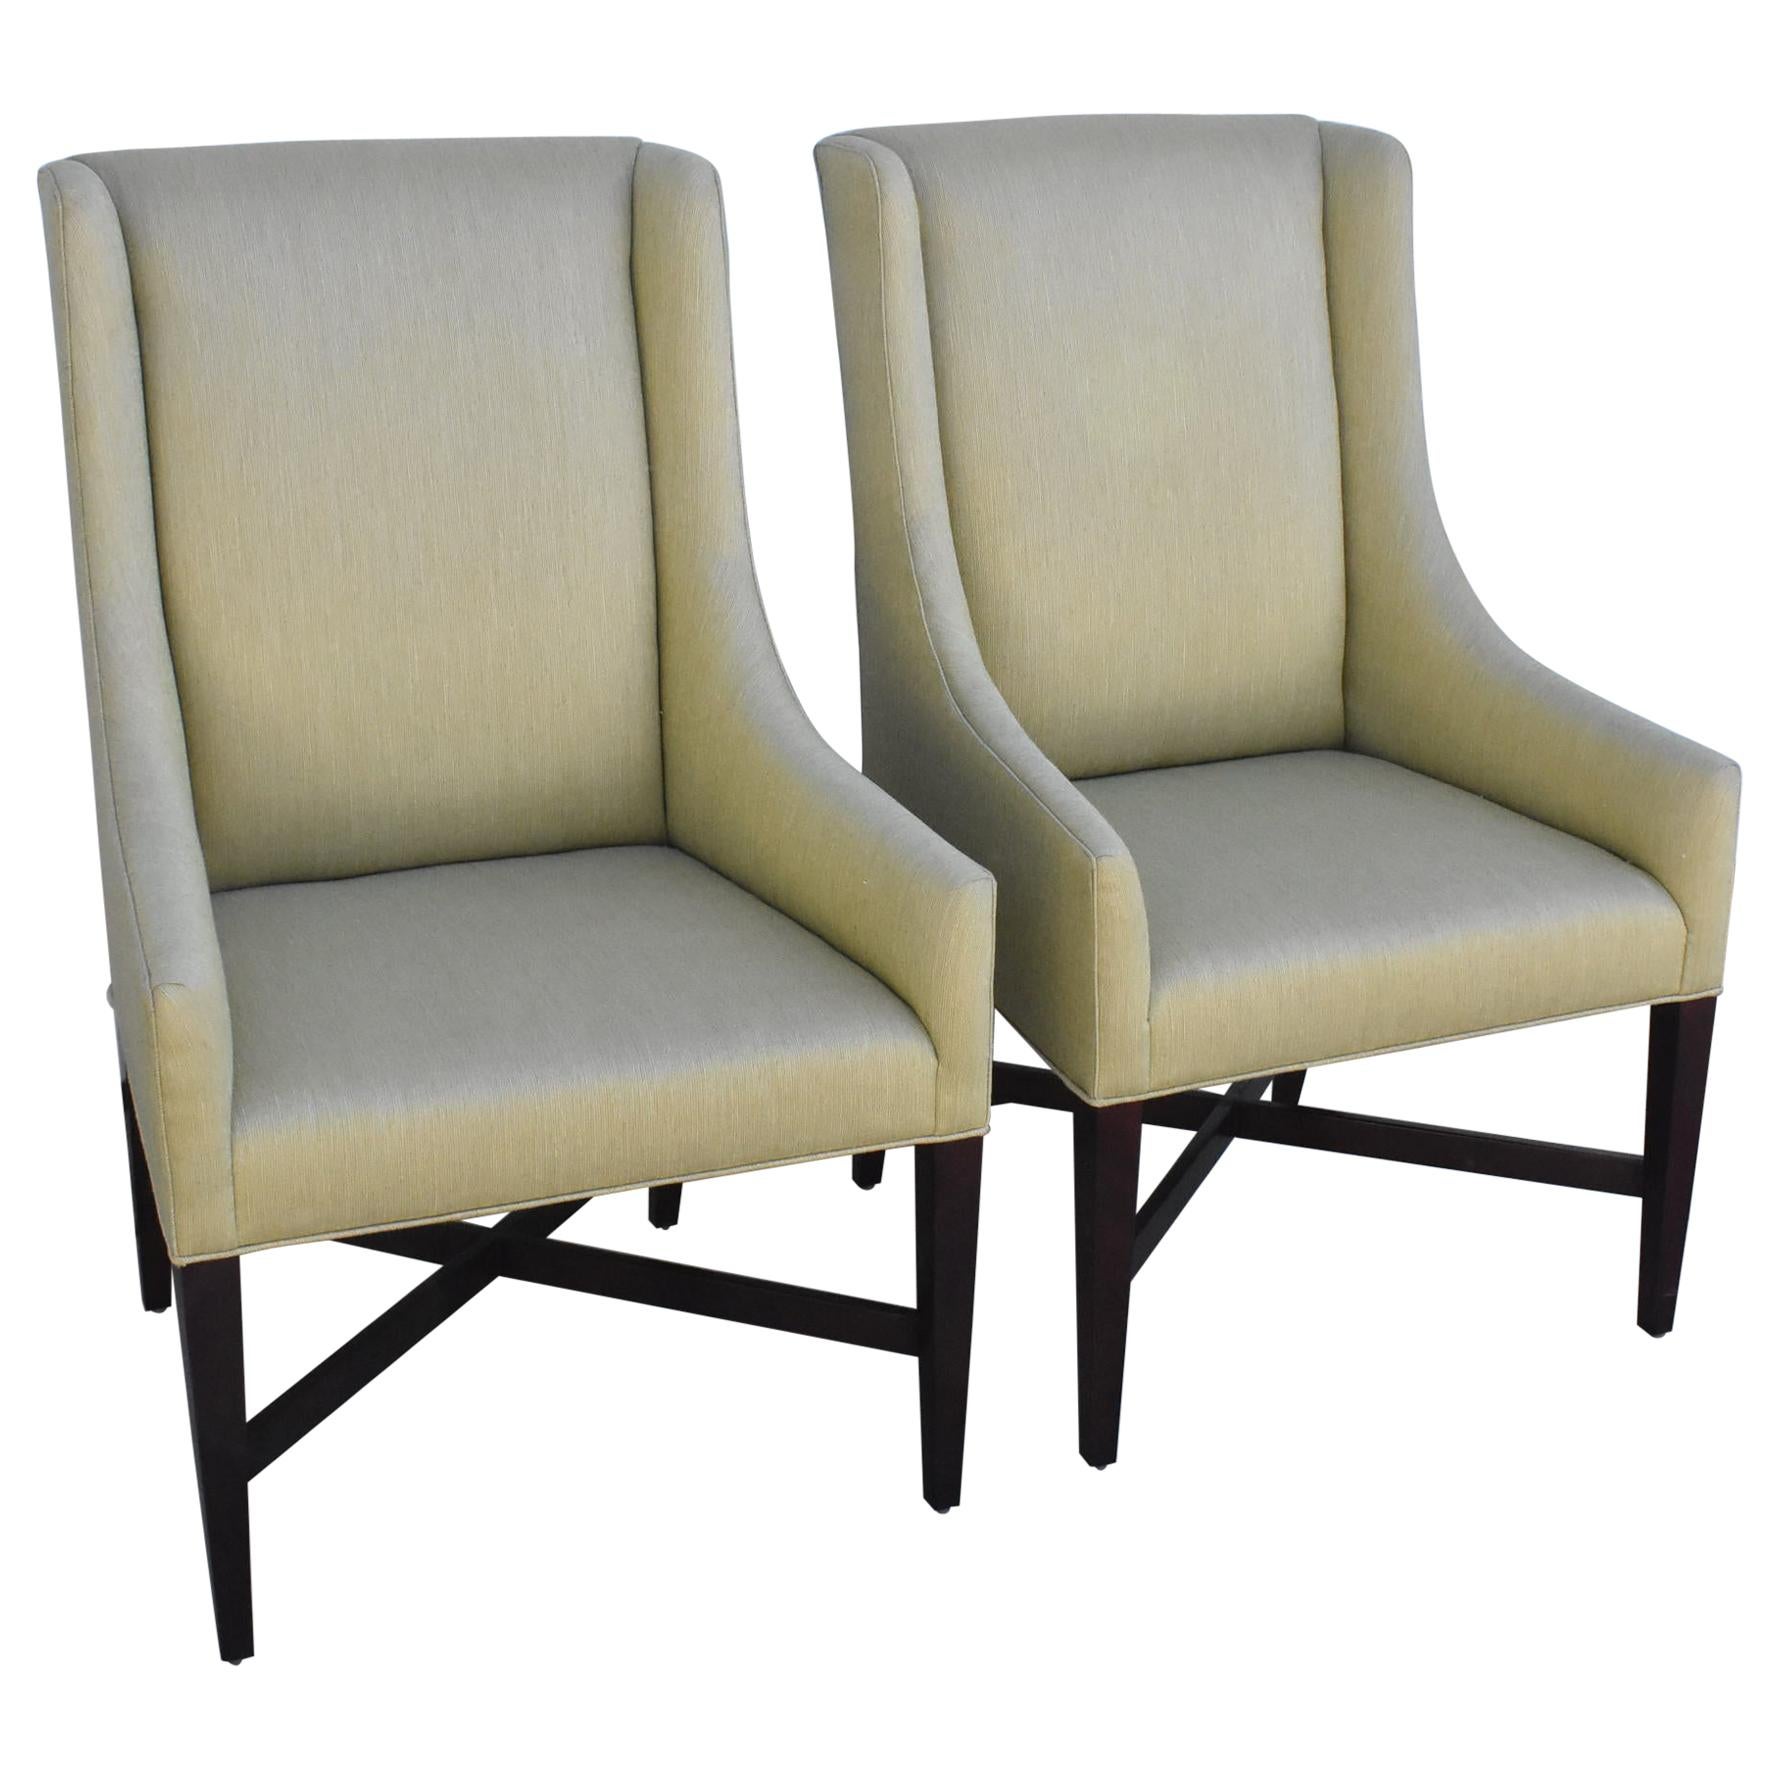 Pair of Dining Captain Side Chairs by Swaim